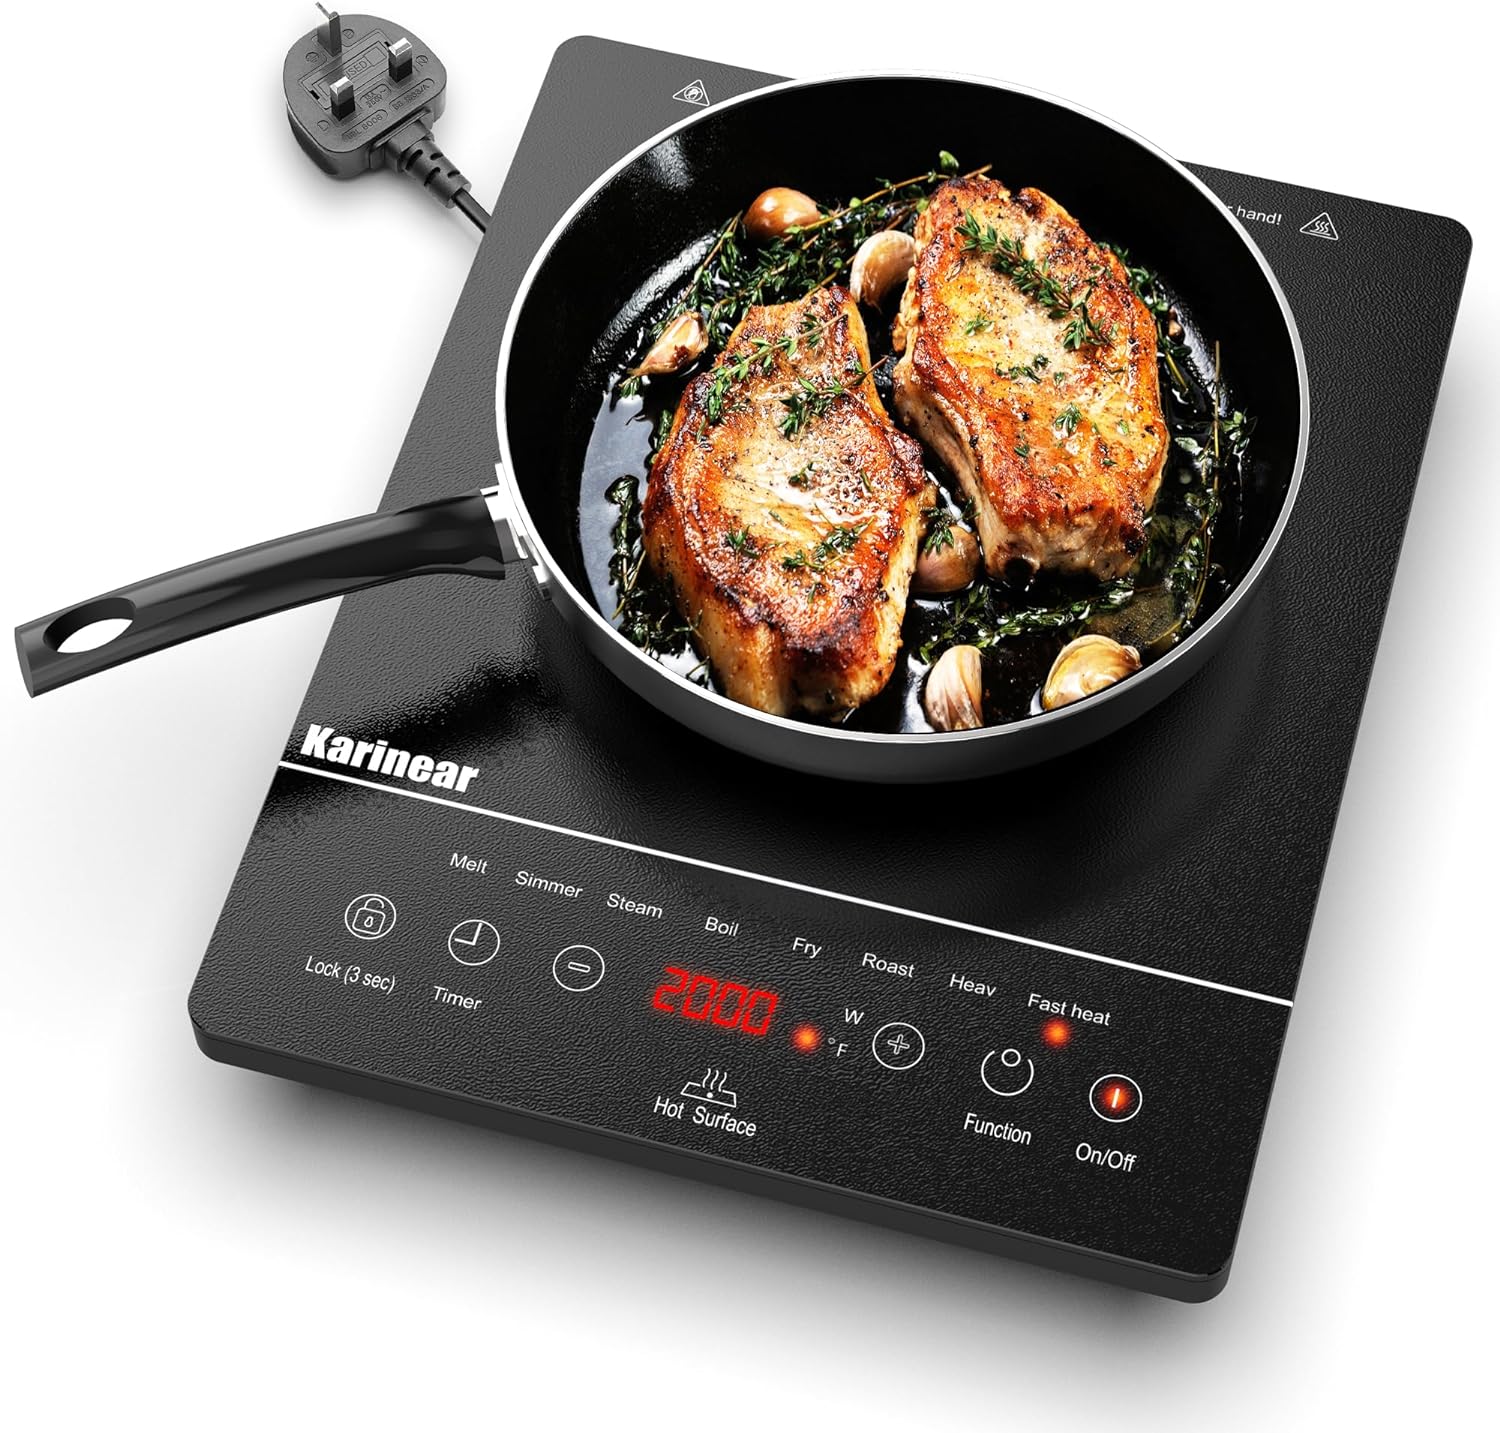 KOCONIC Upgraded to 1800W Single Burner,Electric Cooktop,Hot plate for  cooking,Electric Stove With Timer and Touch Control,No Radiation to Protect